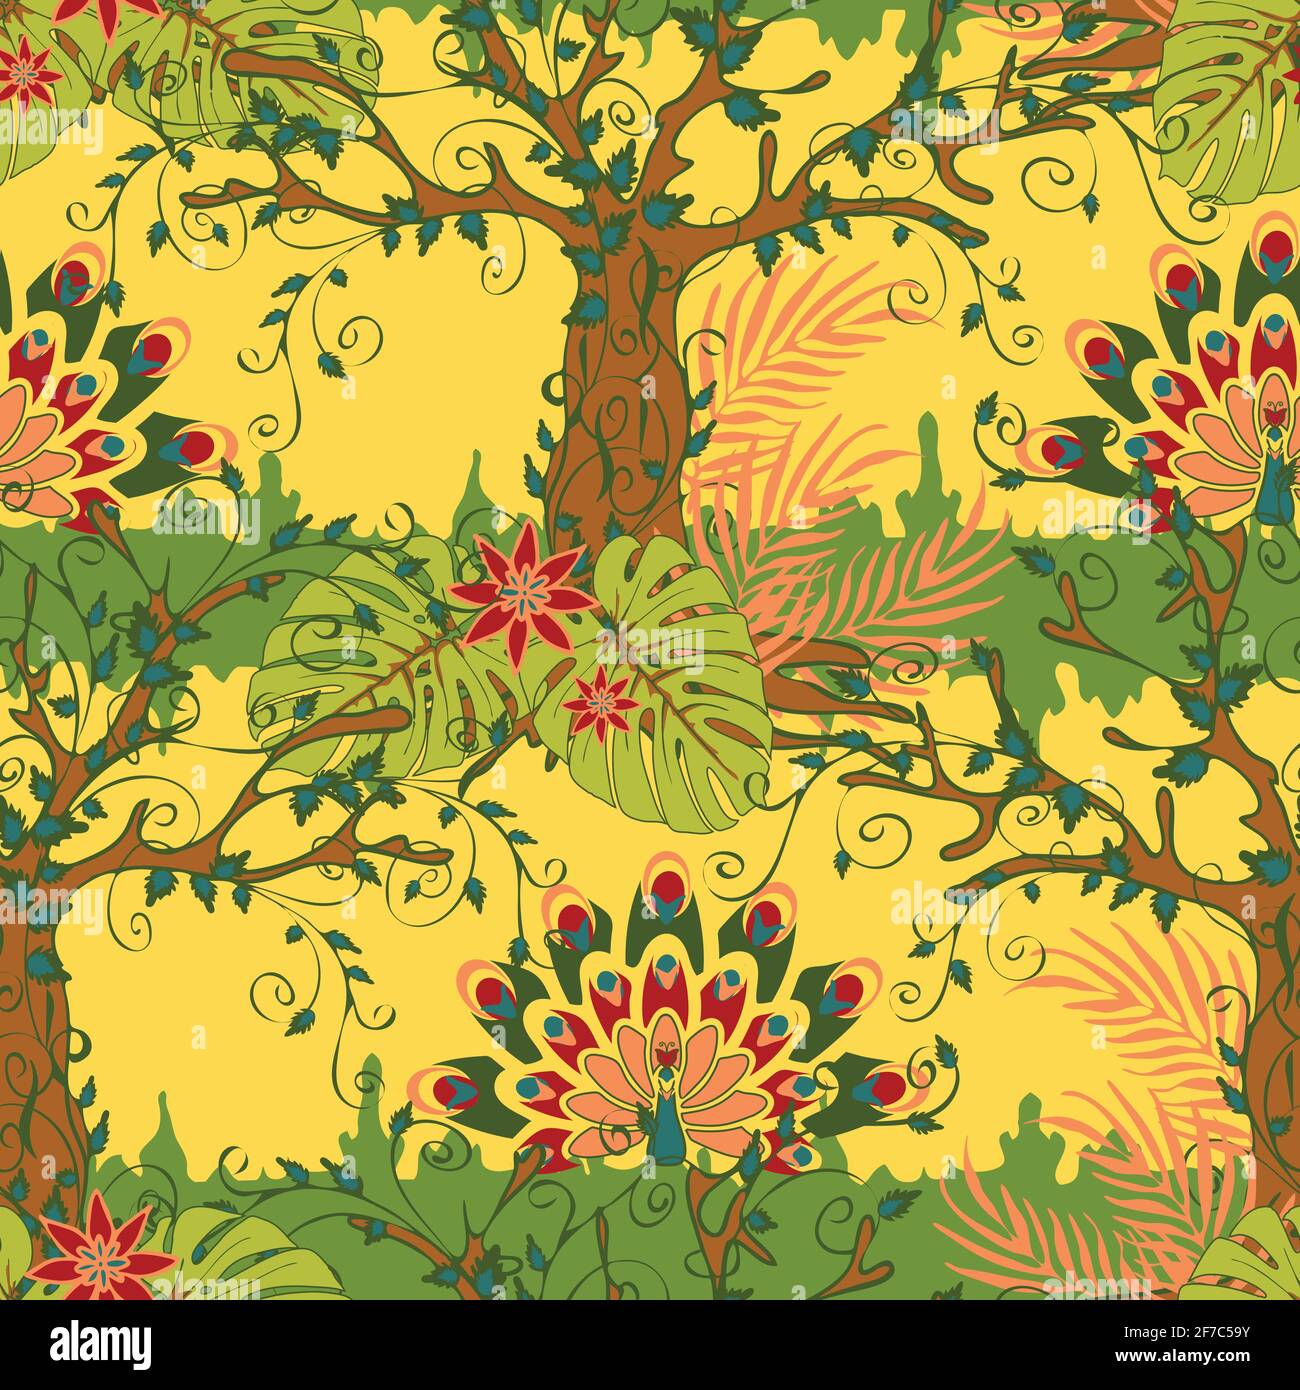 Seamless vector pattern with peacock forest on yellow background. Fantasy wallpaper design with trees and birds. Romantic landscape fashion fabric. Stock Vector